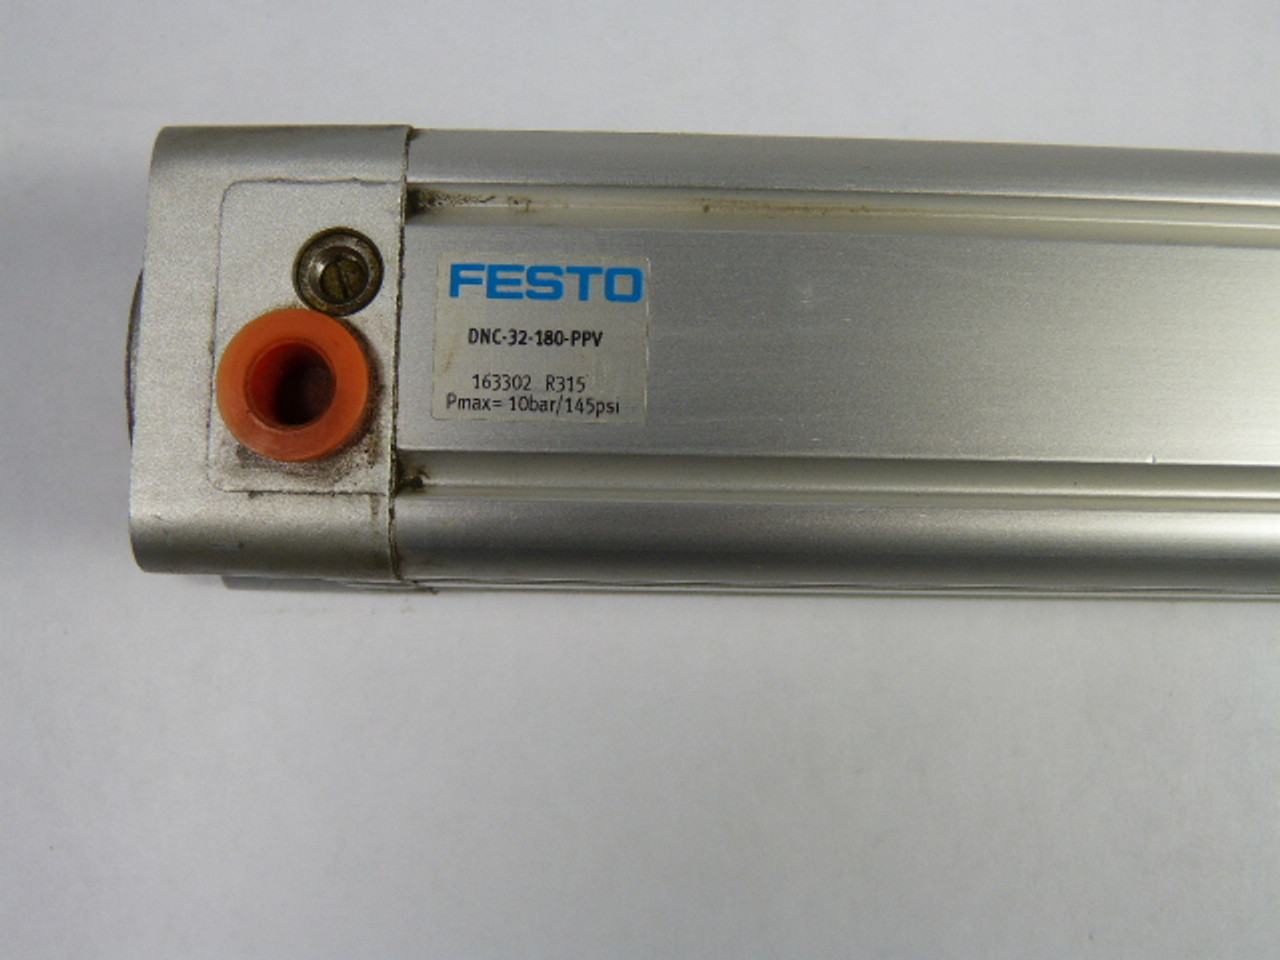 Festo DNC-32-180-PPV Pneumatic Cylinder 32mm Bore 180mm Stroke USED